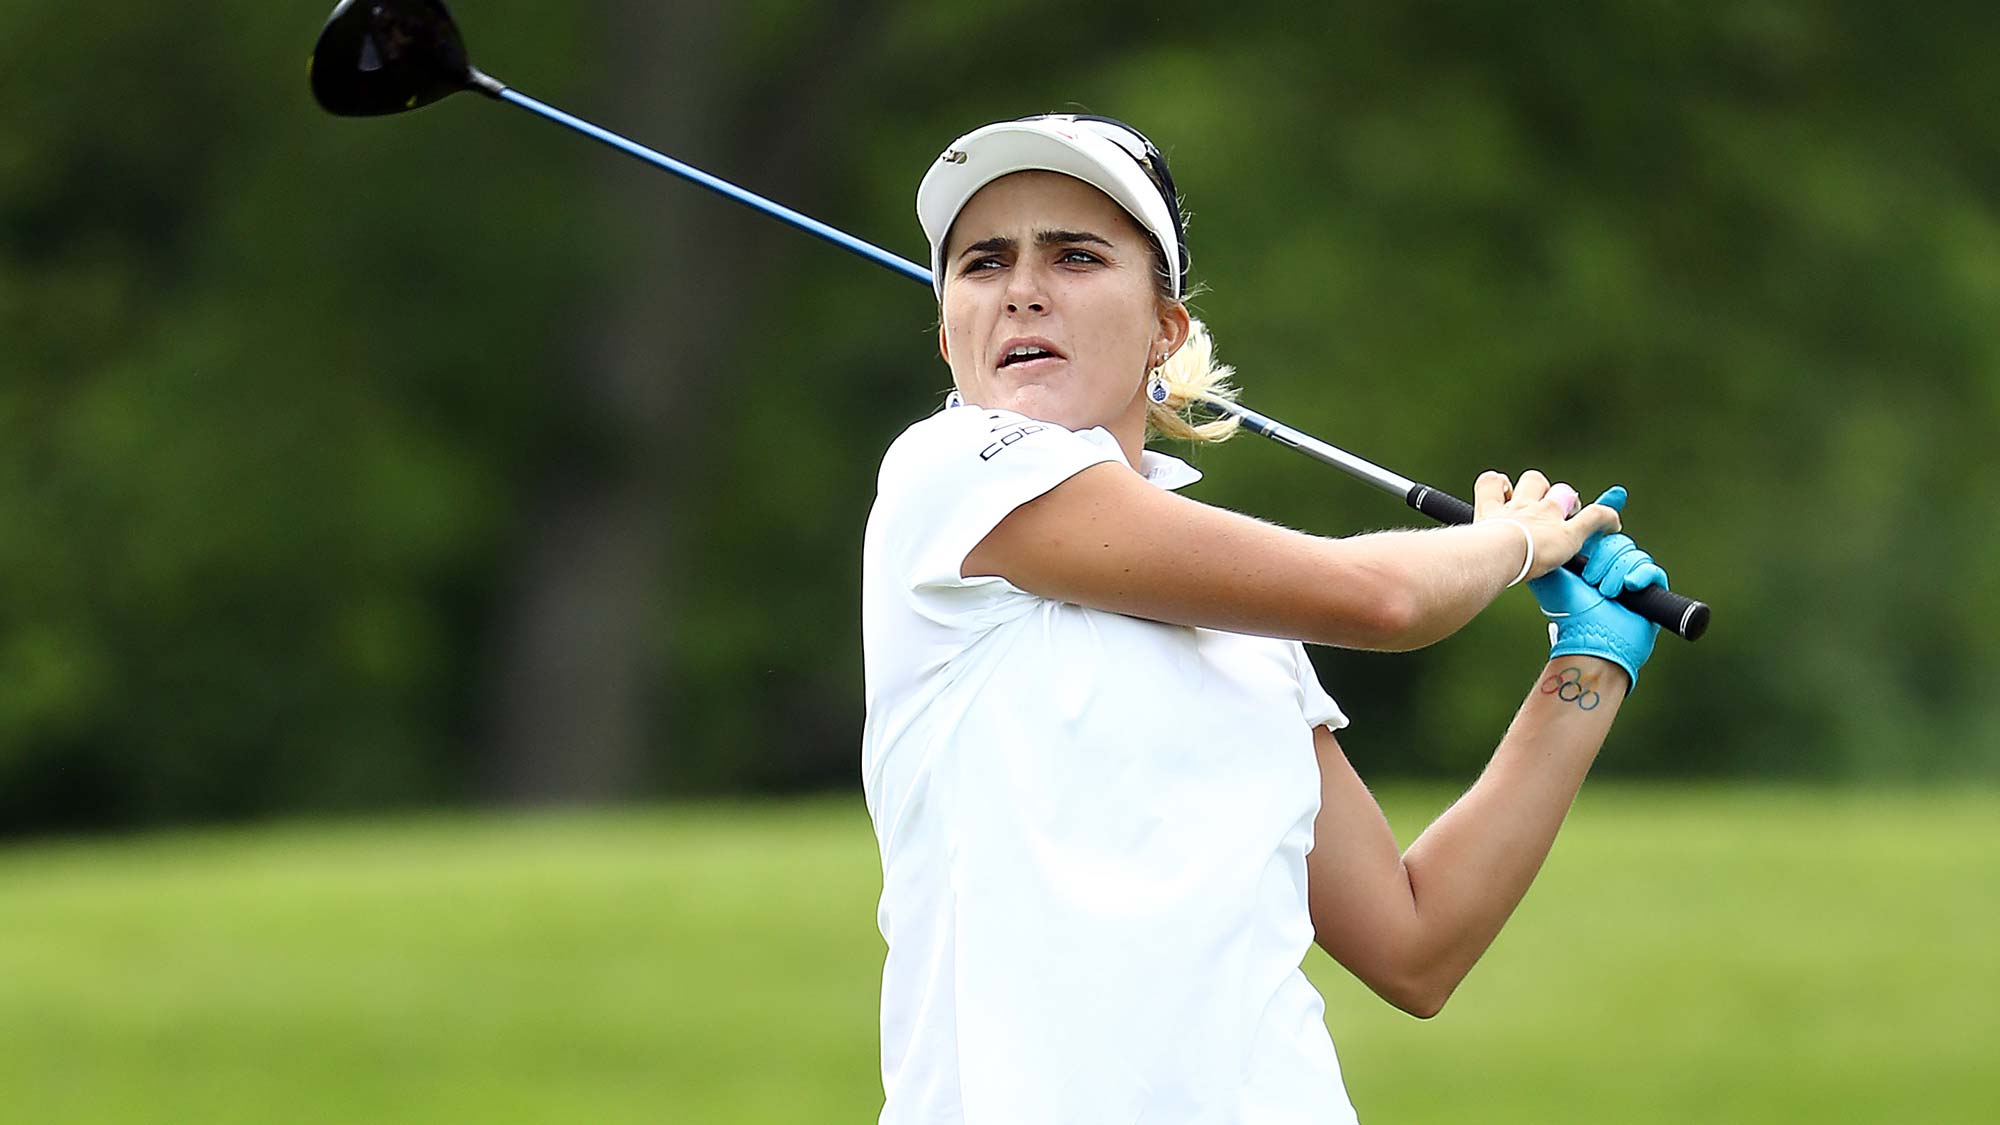 Lexi Thompson hits her first shot on the 15th hole during the first round of the KPMG Women's PGA Championship